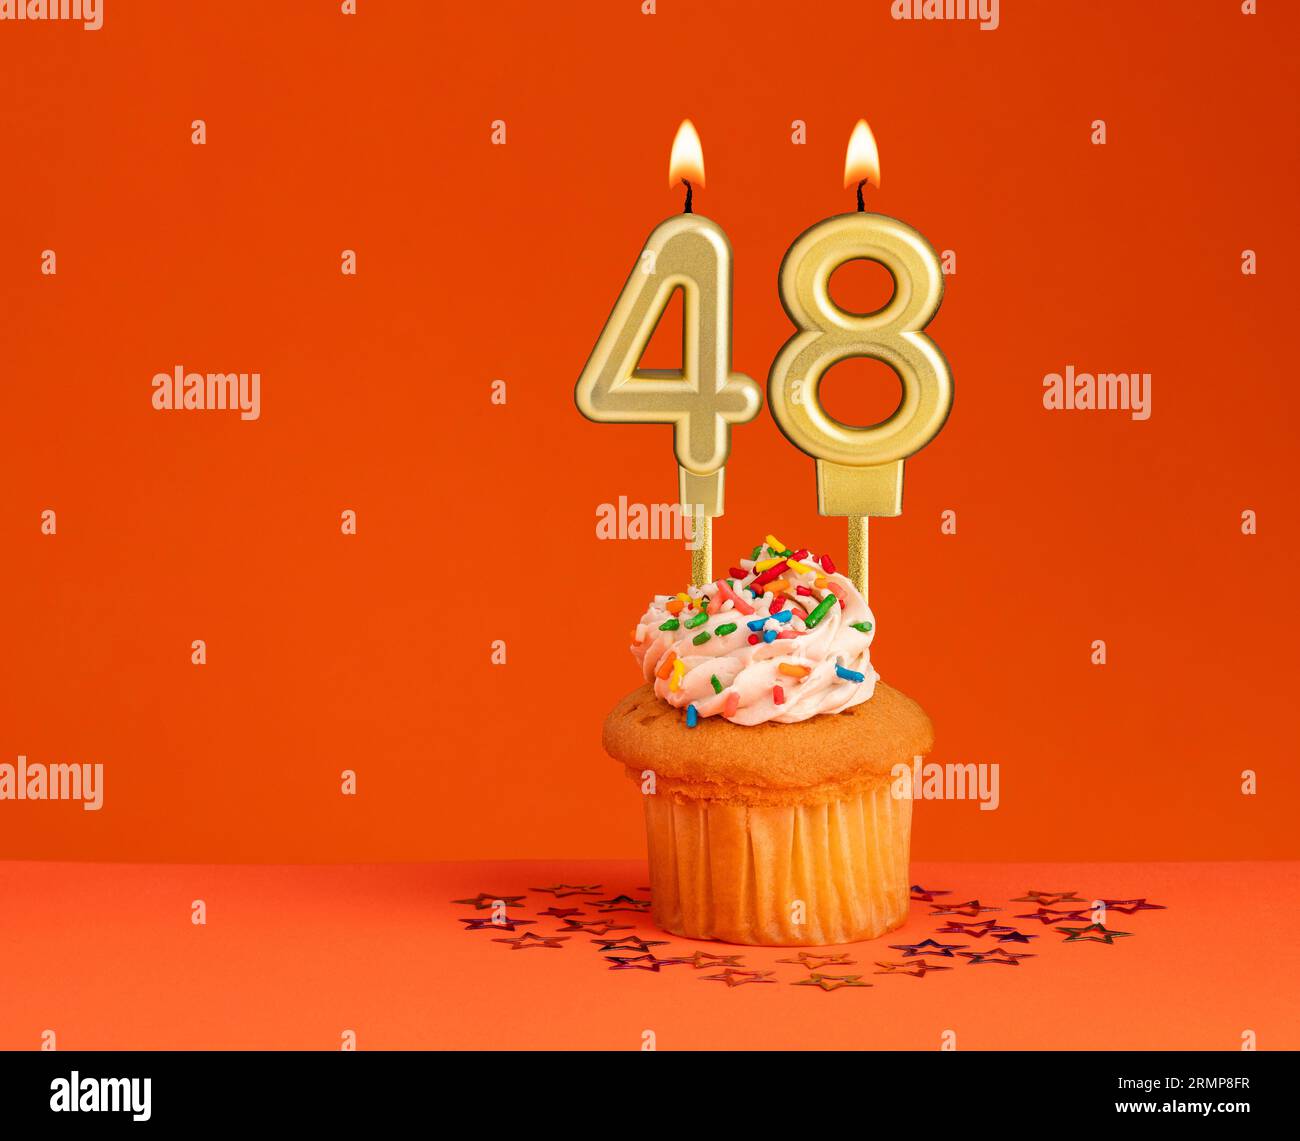 Birthday candle number 48 - Invitation card with orange background Stock Photo